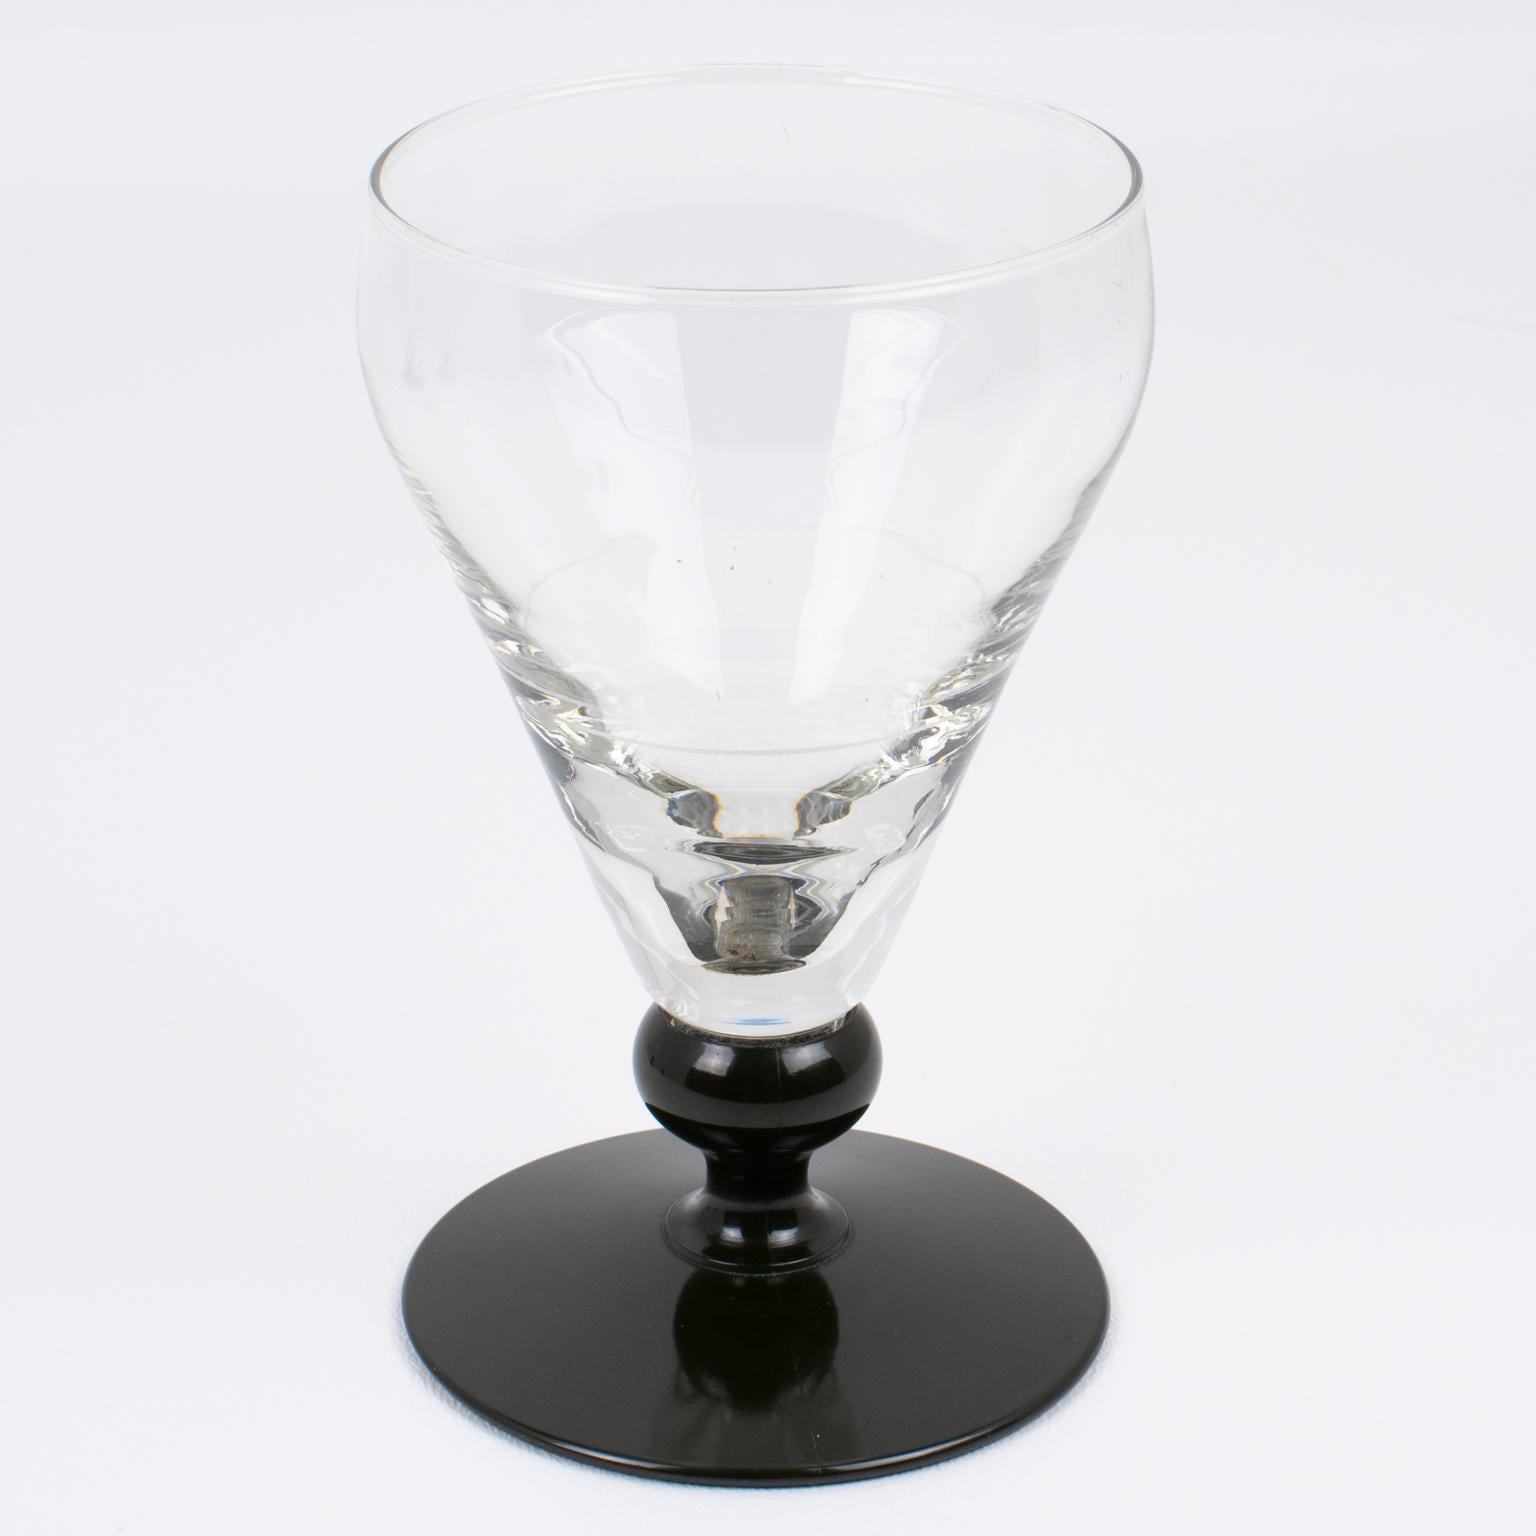 Early 20th Century French Hand-Blown Glass and Bakelite Absinthe Glasses Set, 3 pieces, 1910s For Sale